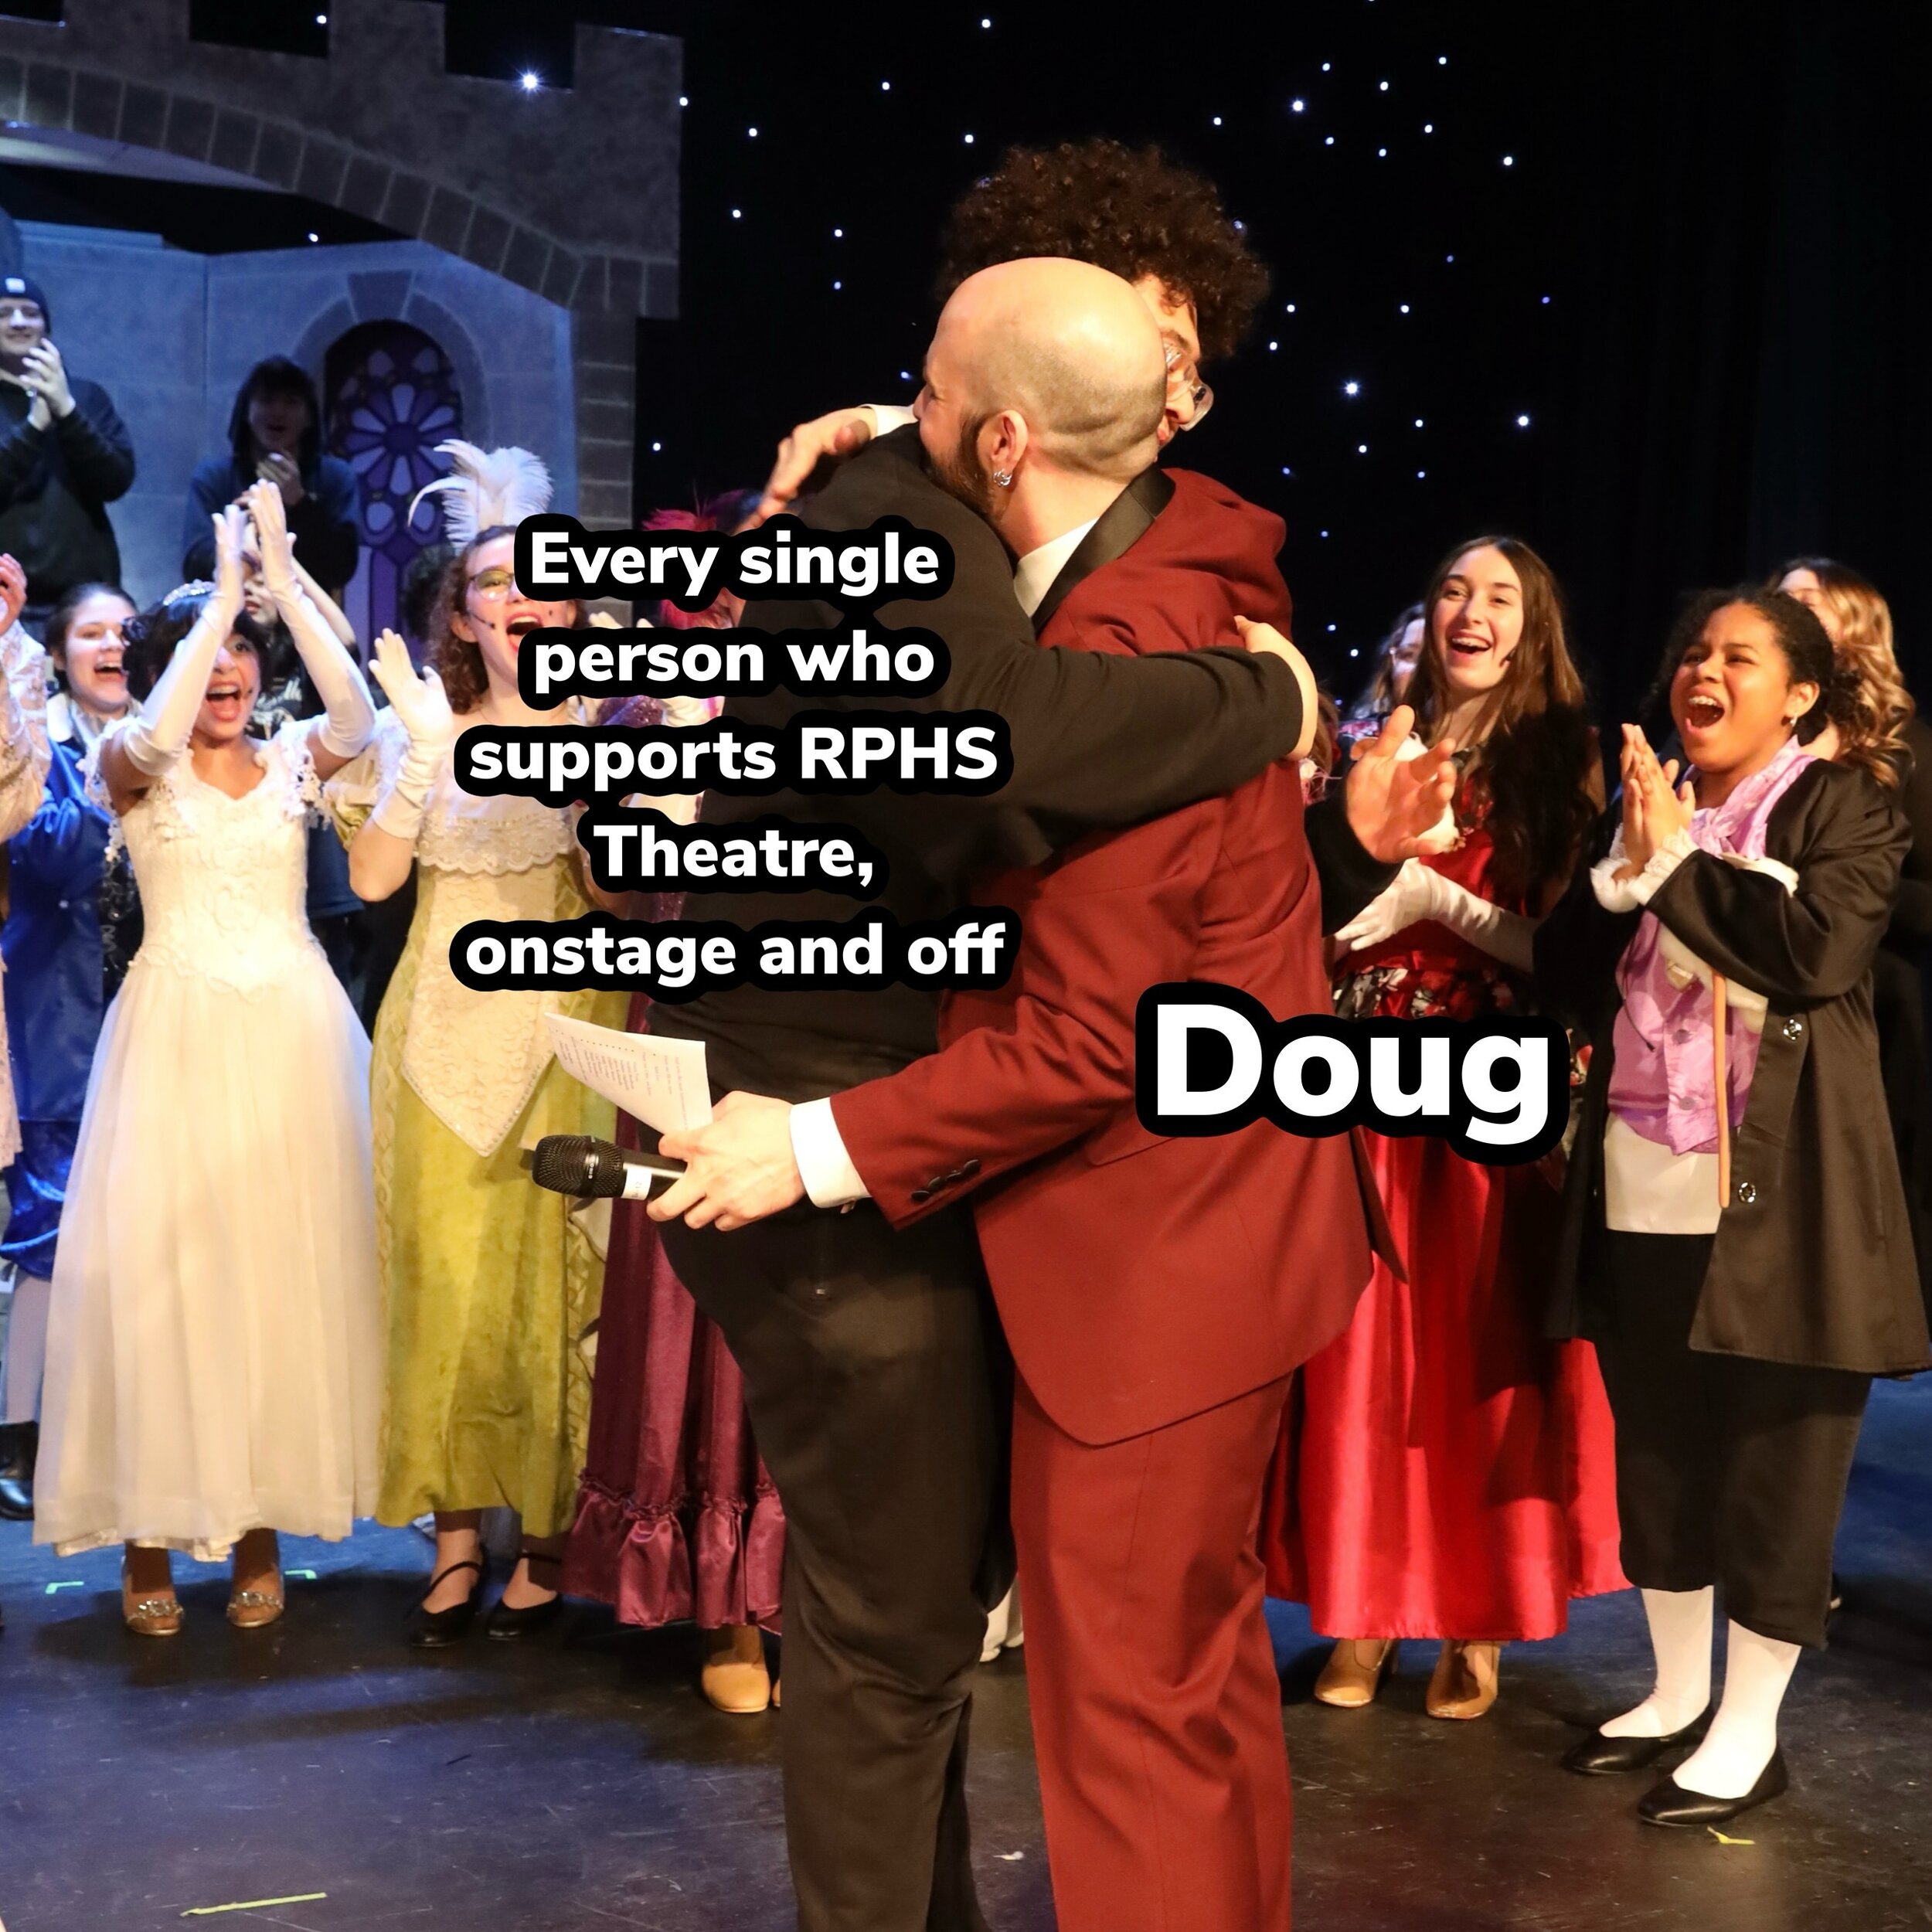 One final mee-mee to close out musical season. Proud of all of you, everyday.

#Cinderella #RodgersAndHammersteinsCinderella #ALovelyNight #👸🕛🧚&zwj;♀️👠🤴 #TheatreMemes #TheaterMemes #RosellePark #RoselleParkHighSchool #Community #CommunityTheatre